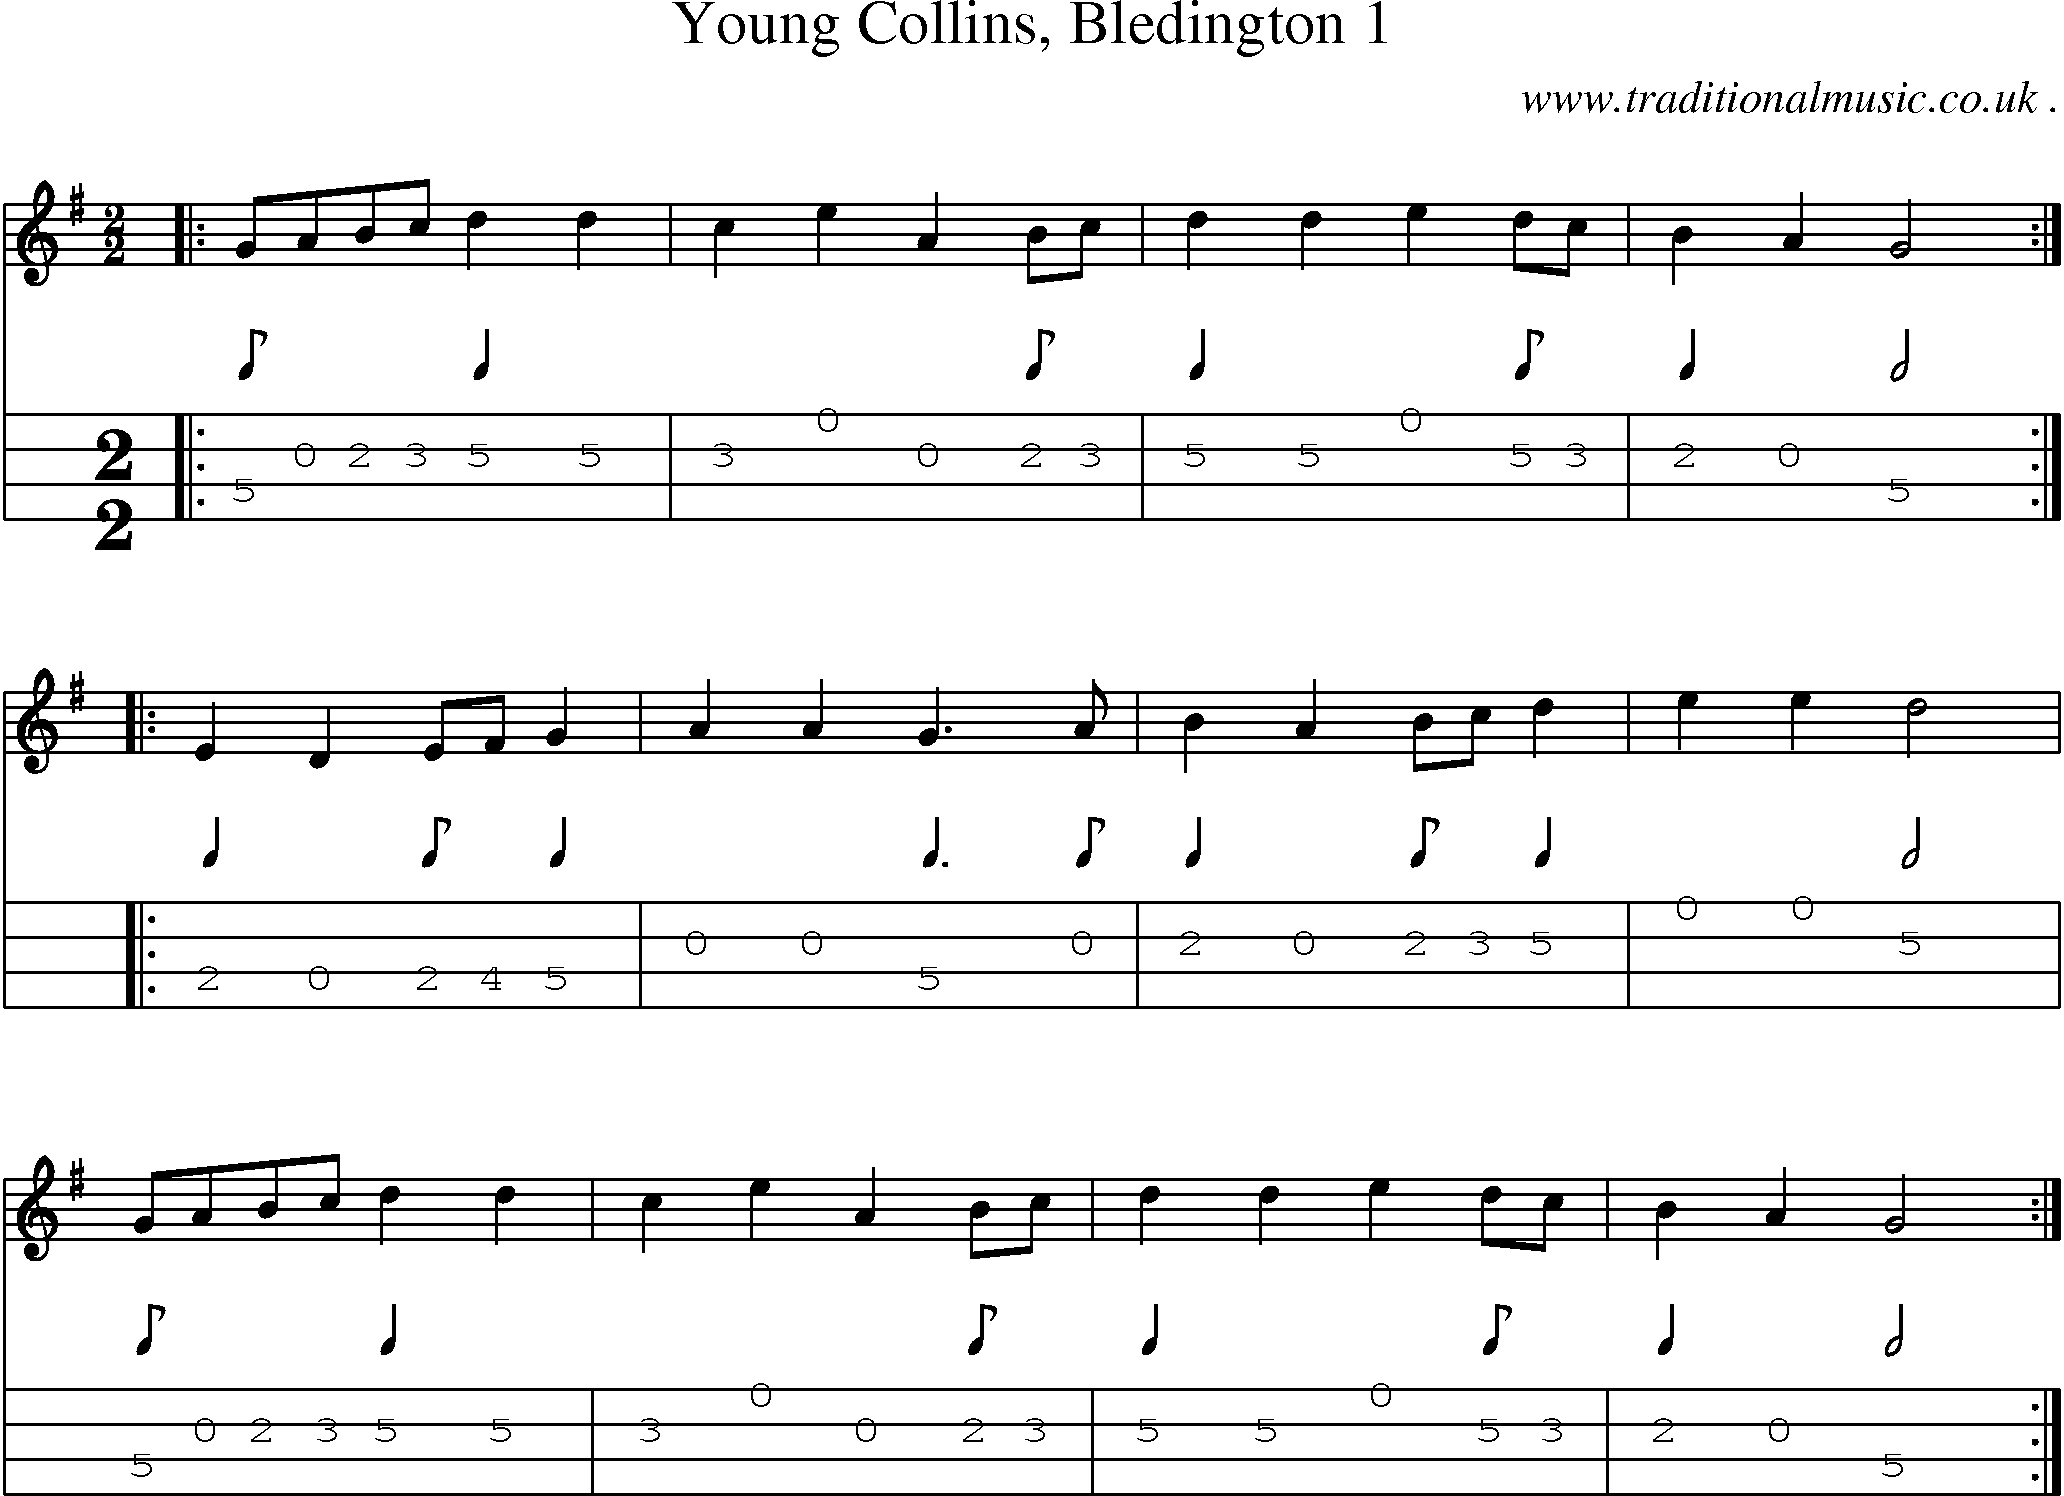 Sheet-Music and Mandolin Tabs for Young Collins Bledington 1